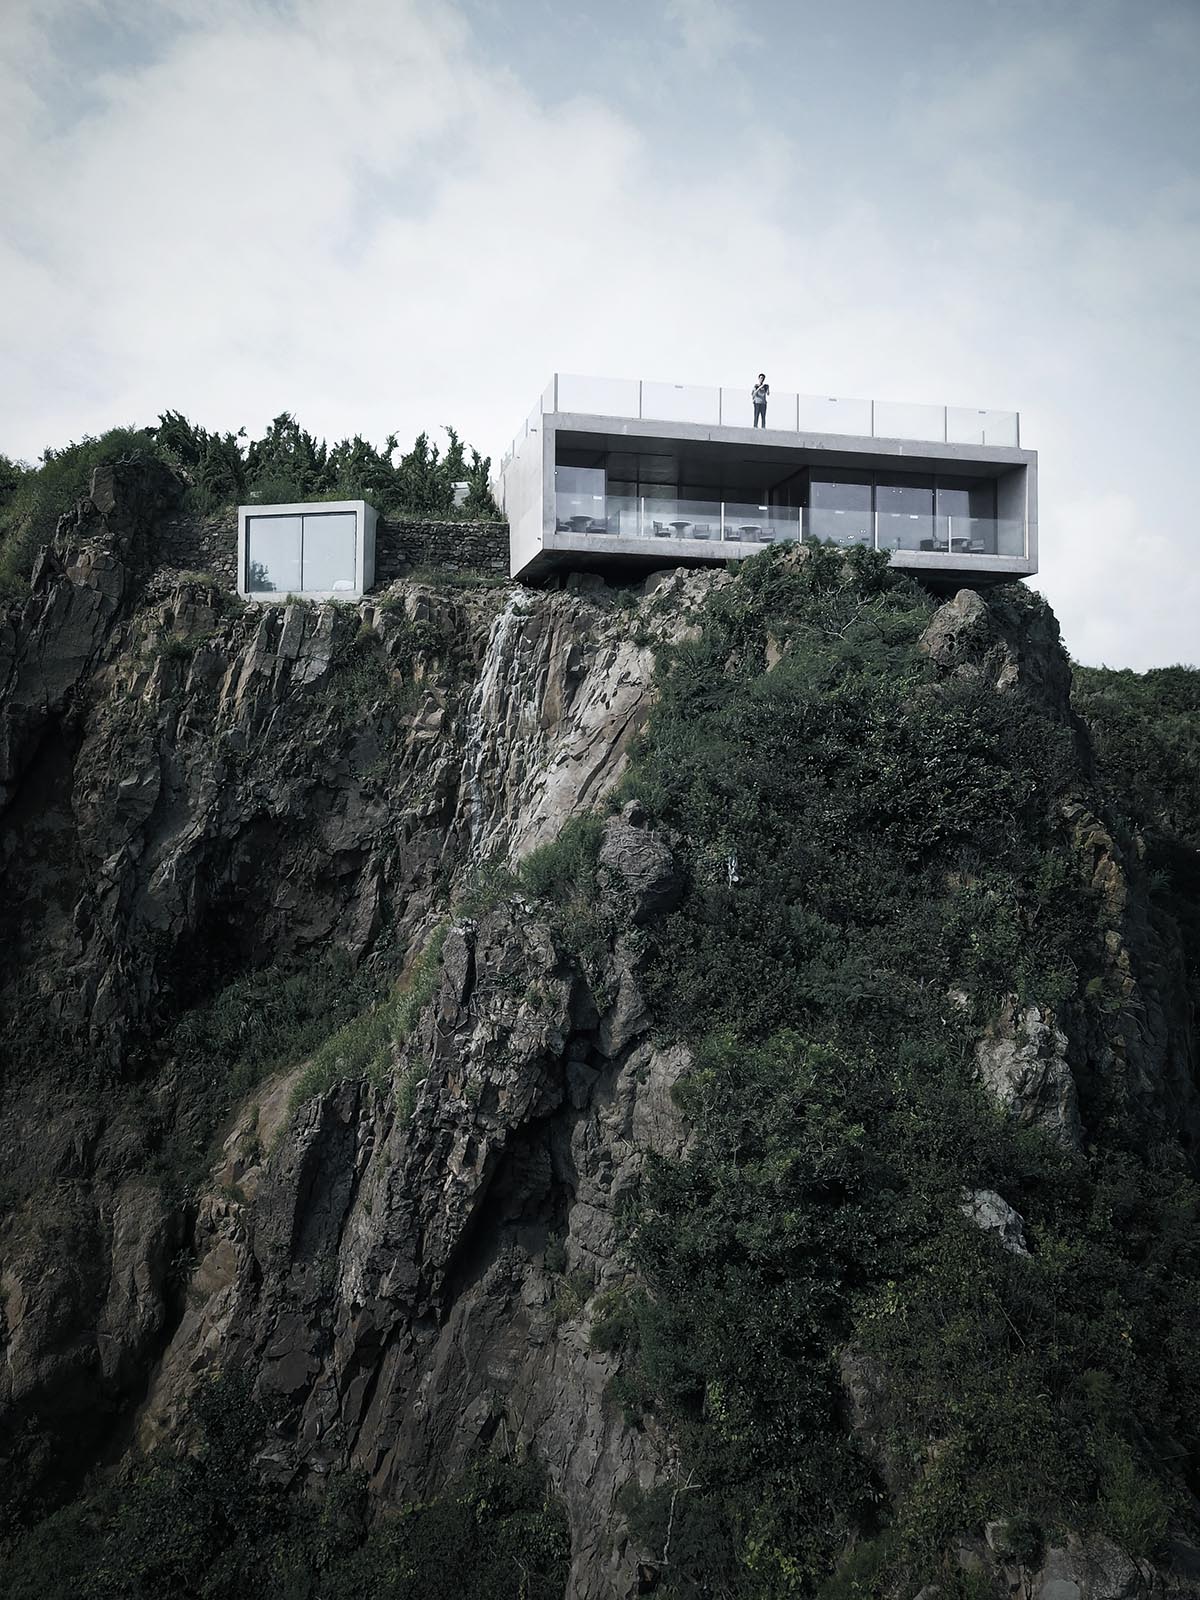 This extension of the town is built on such narrow cliffs